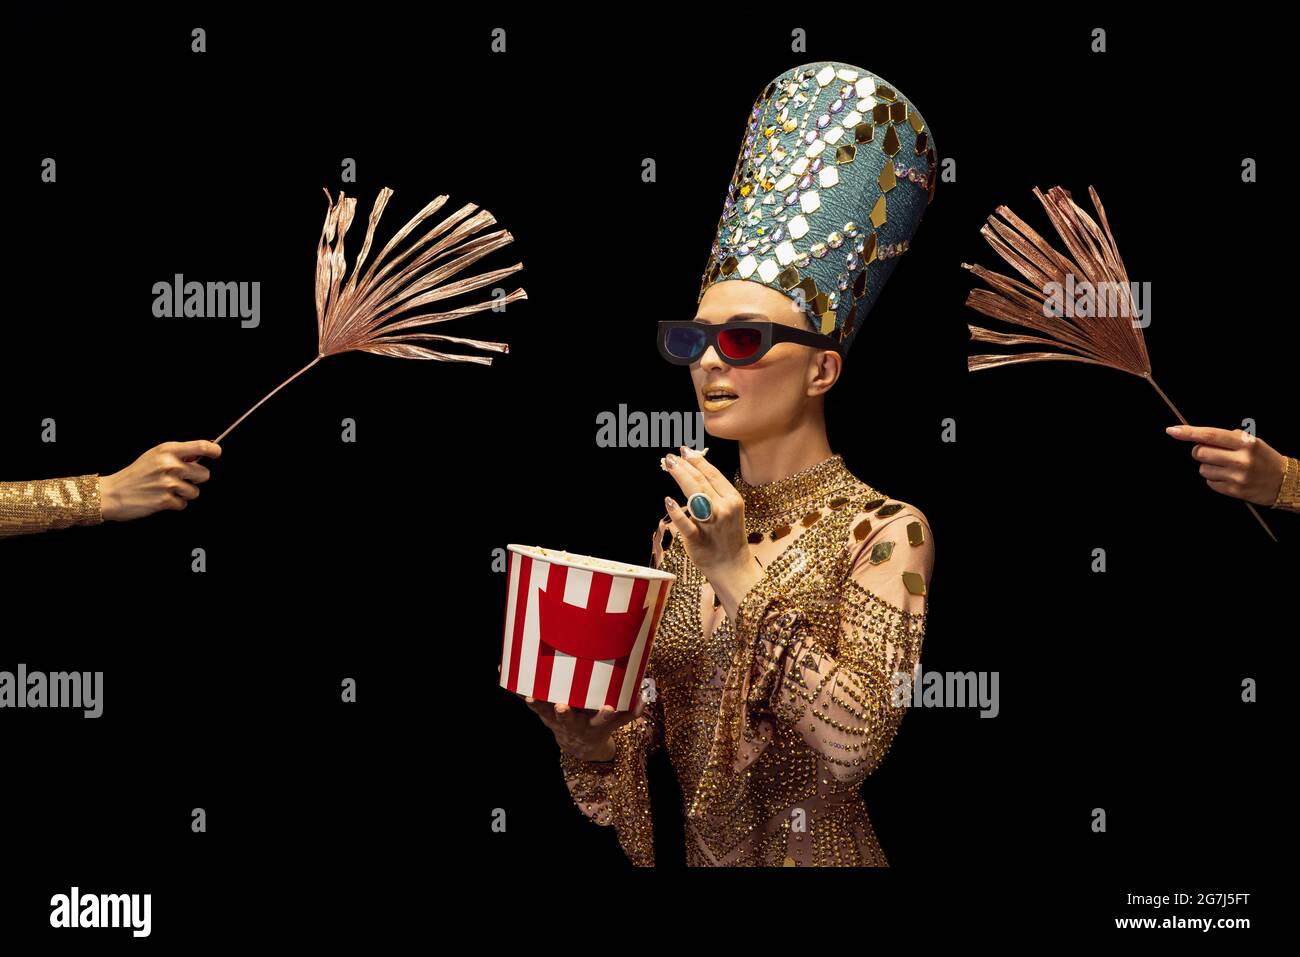 One young woman in image of Nefertiti in art performance watching movie isolated on dark background. Retro style, comparison of eras, humor concept. Stock Photo